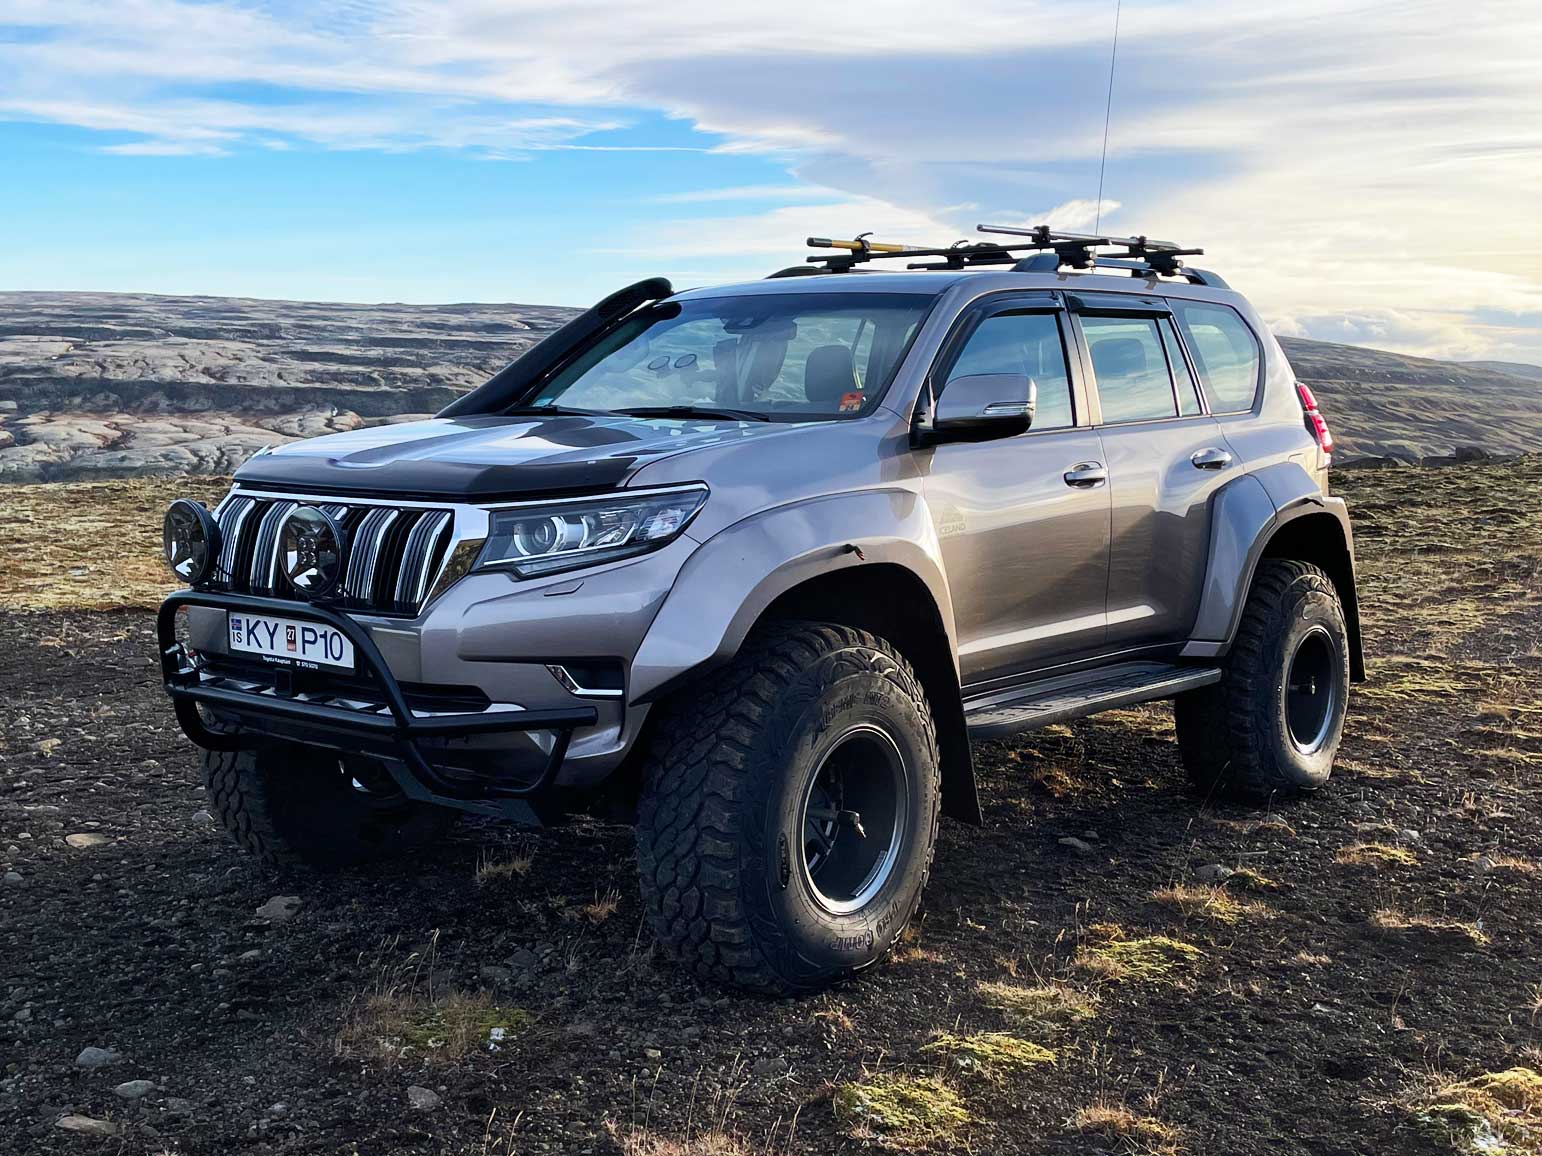 Iceland Luxury Tours modified 4x4 vehicles for private tours in Iceland